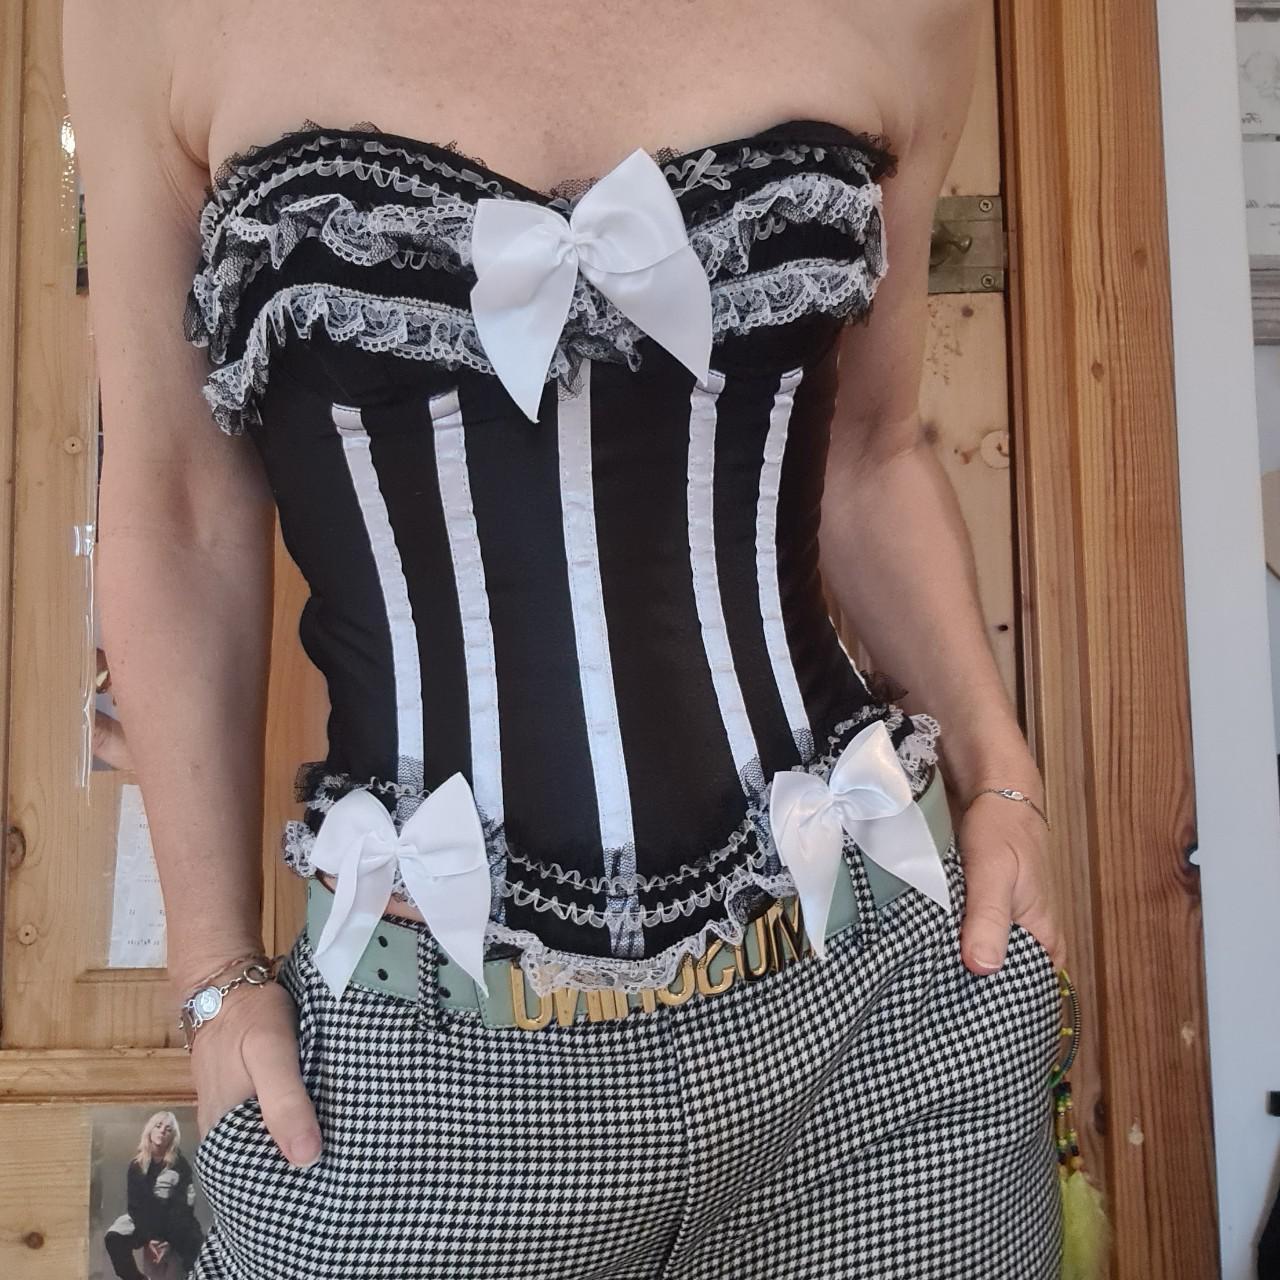 Message for shipping The cutest Fairycore corset! 🌹 - Depop